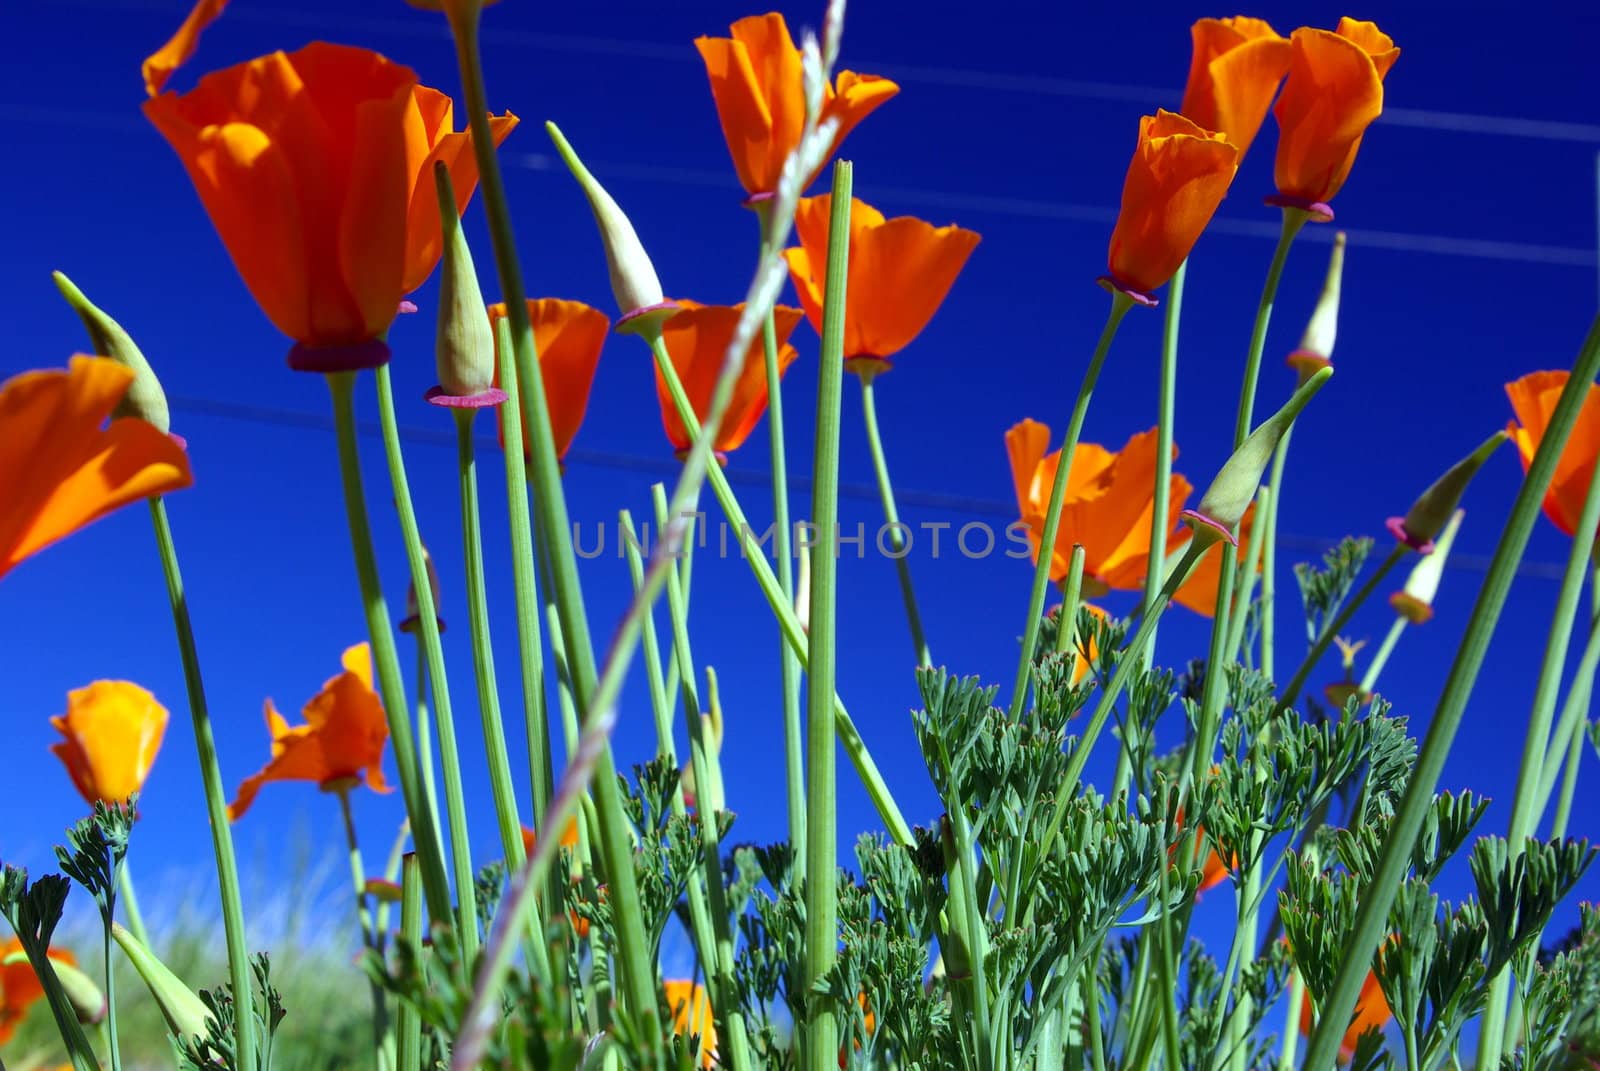 California poppies against a blue spring sky with green foliage